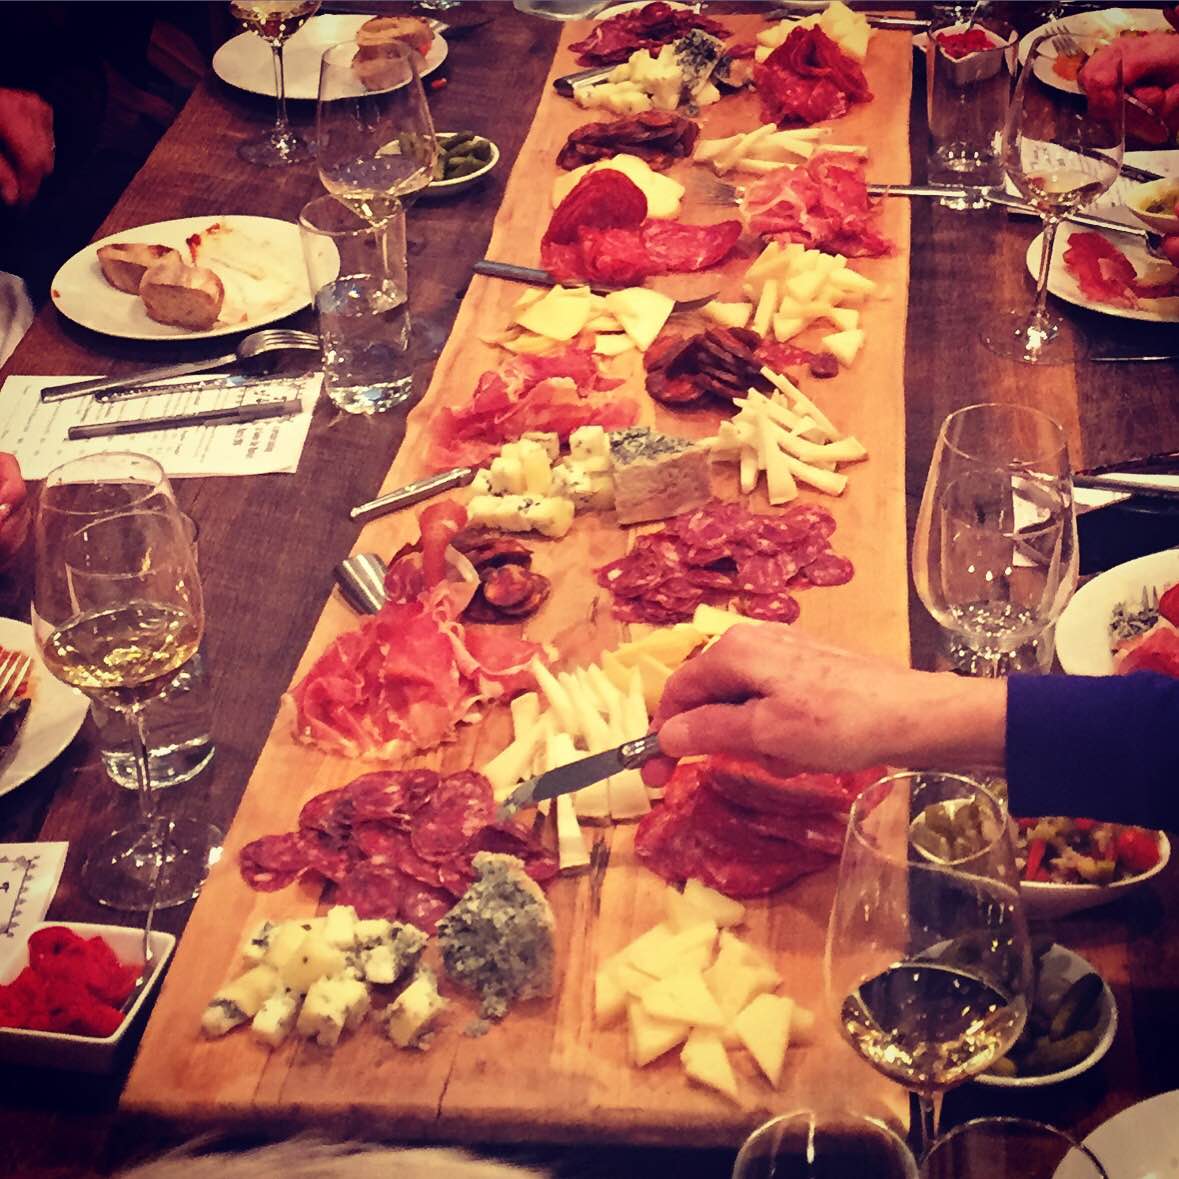 Table with a charcuterie board photo provided by Goose the Market